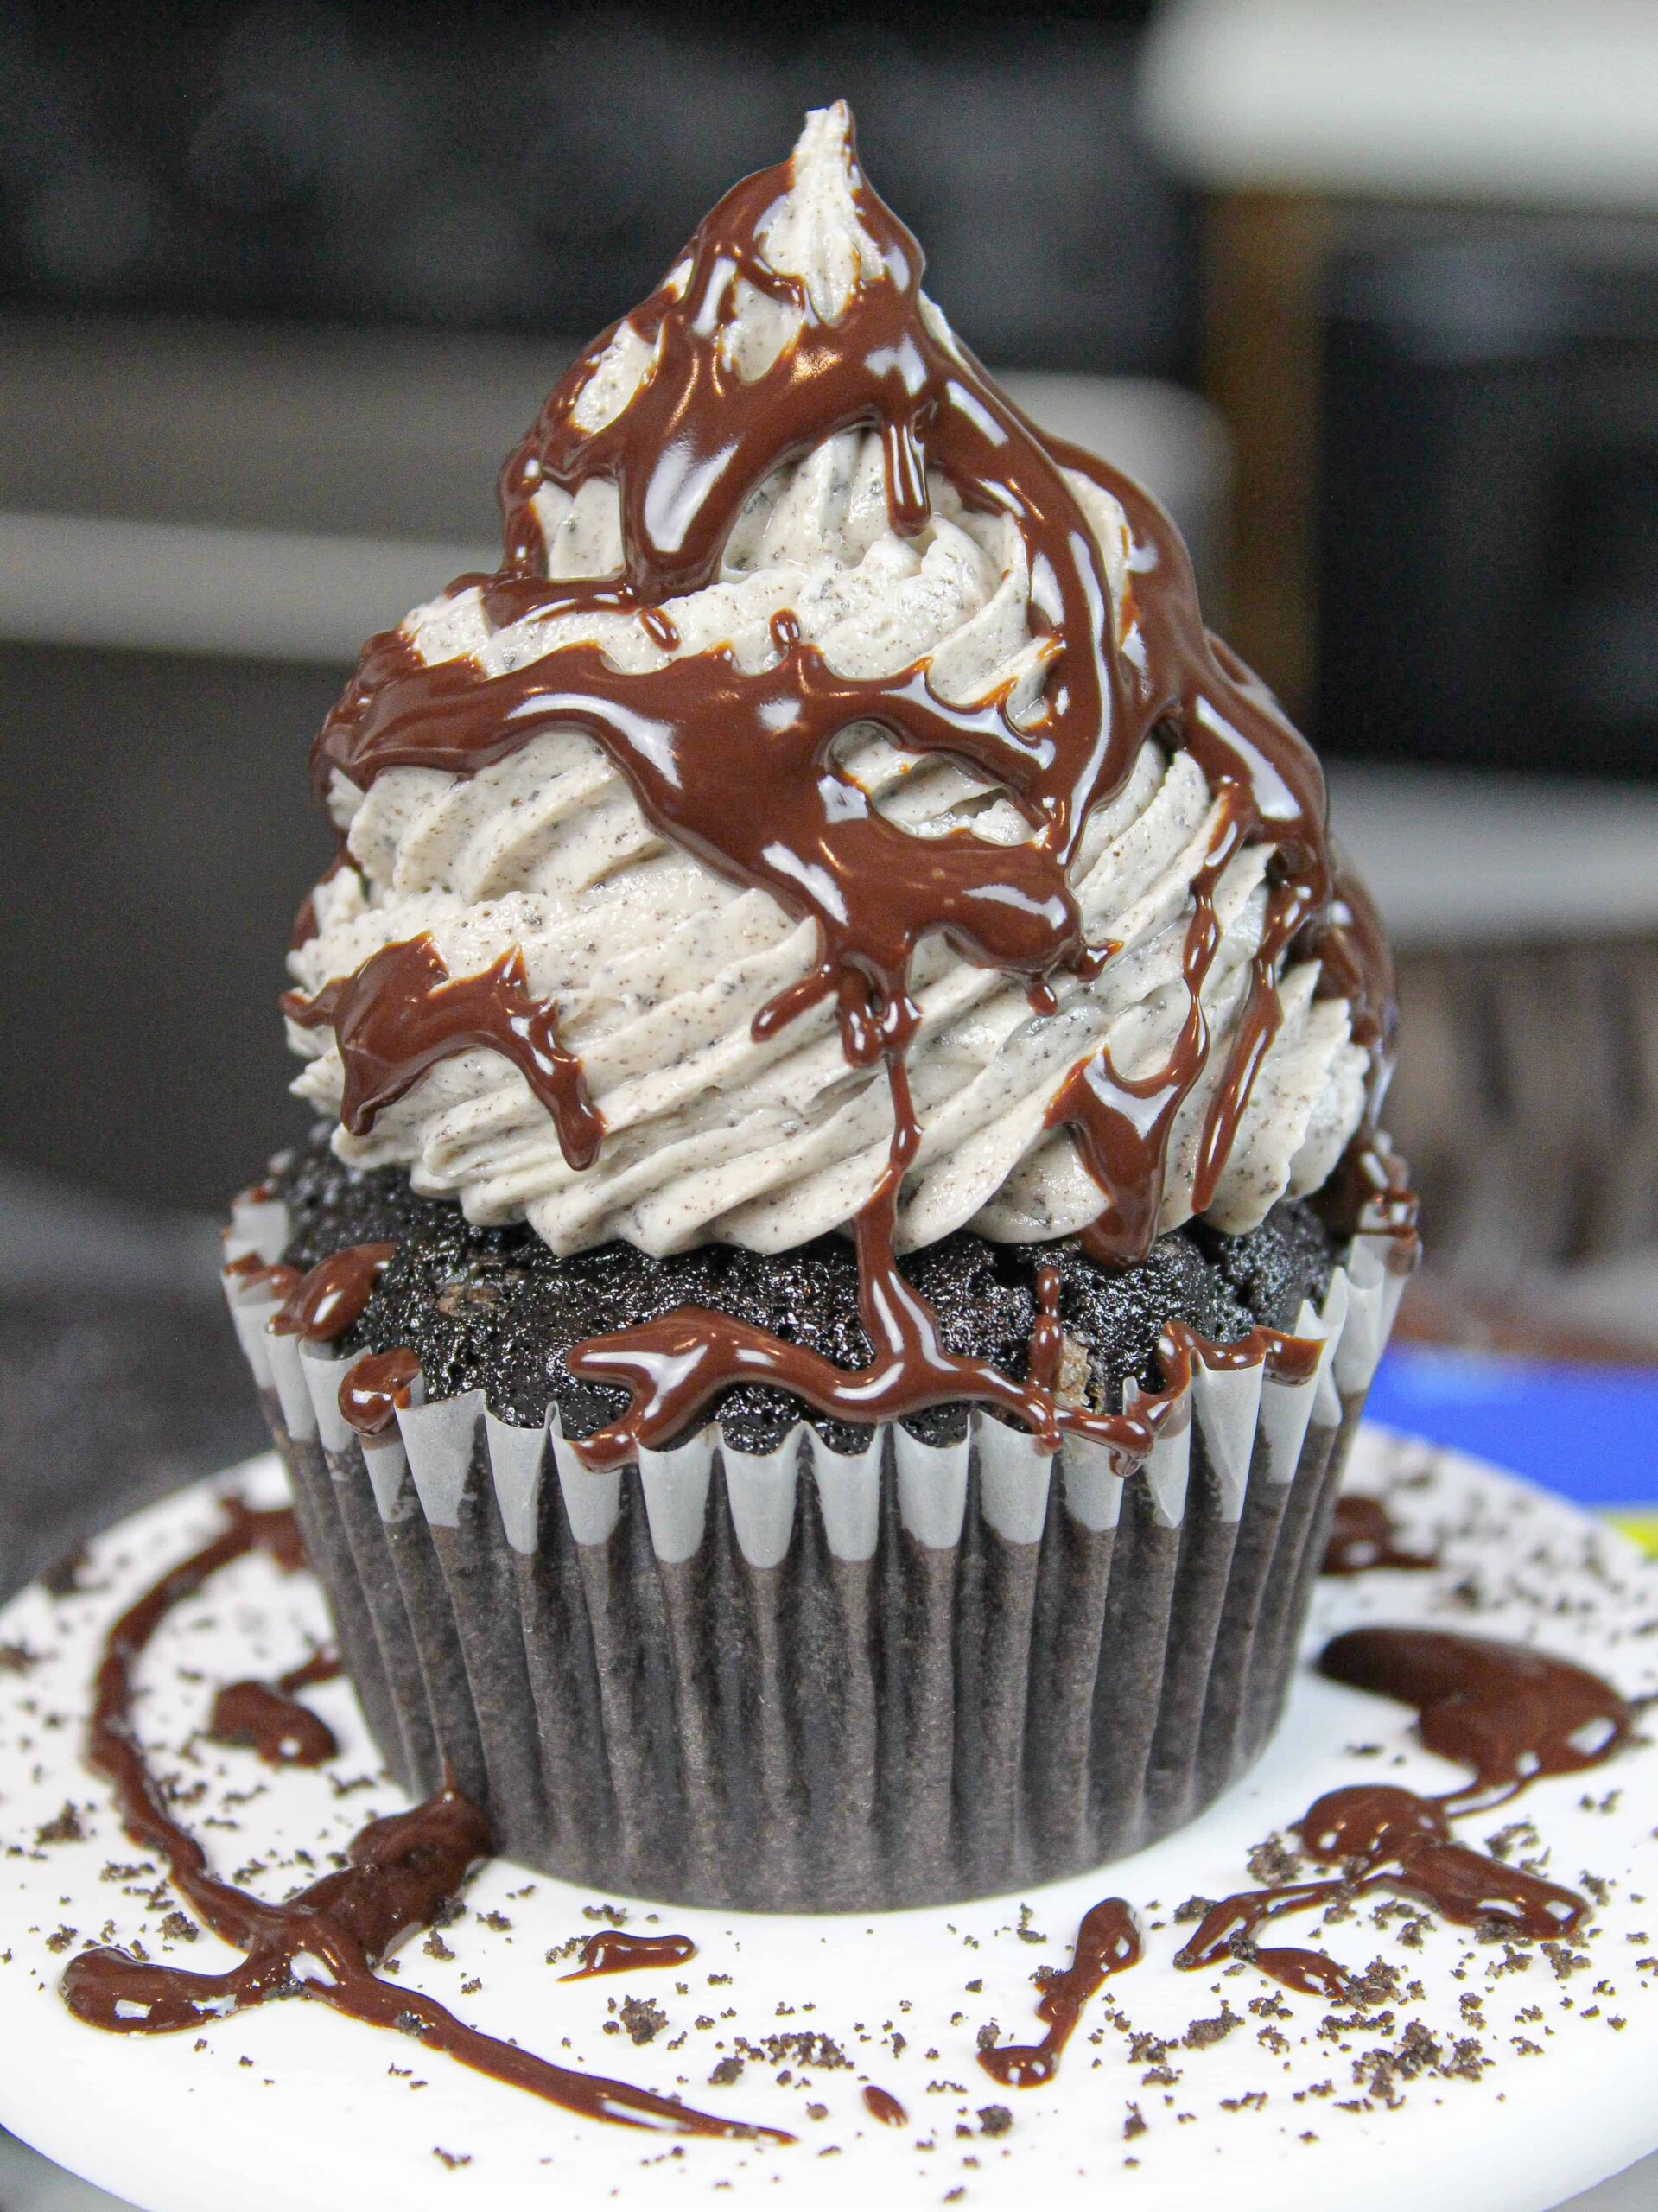 image of oreo cupcake drizzled with chocolate ganache and crushed oreo crumbs